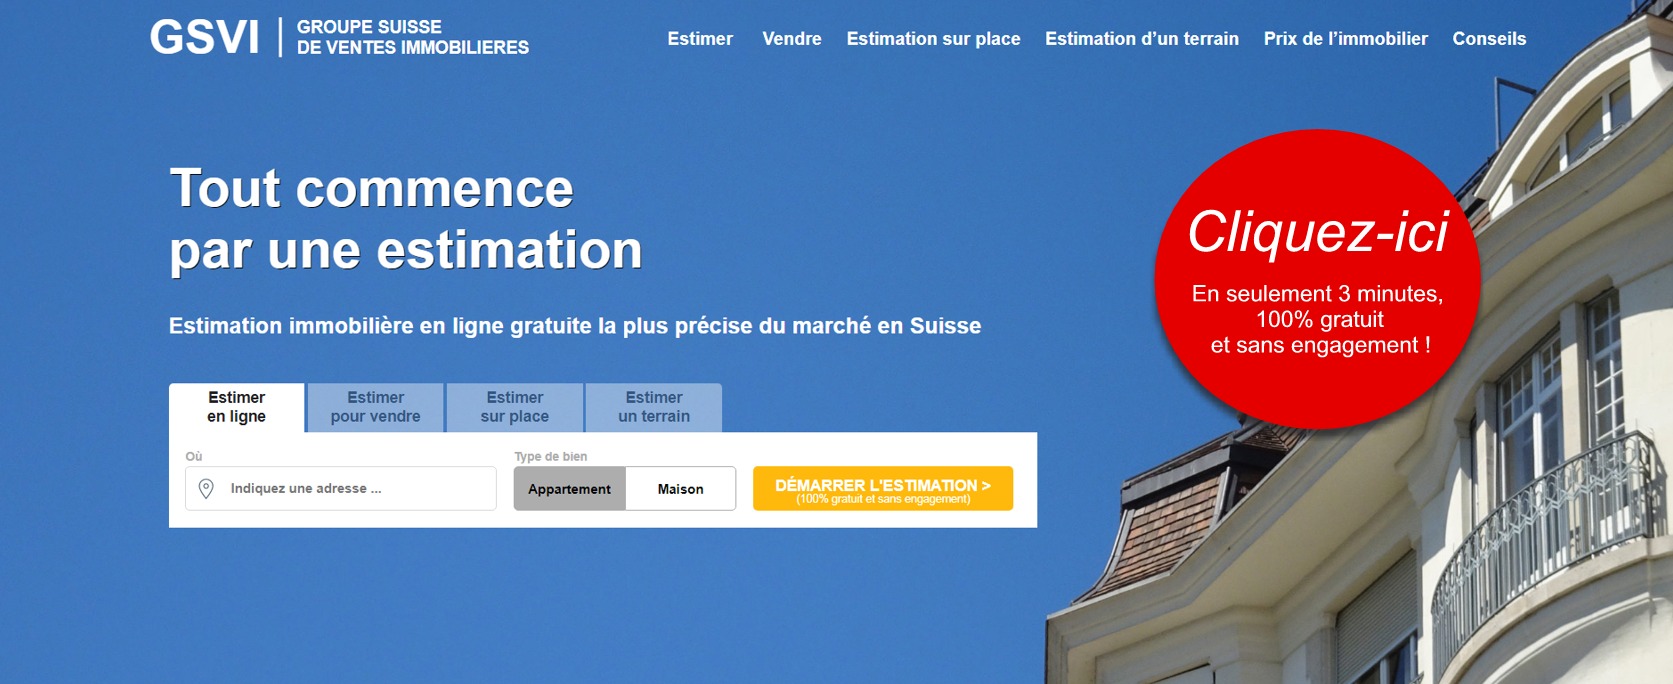 evaluation immobiliere suisse